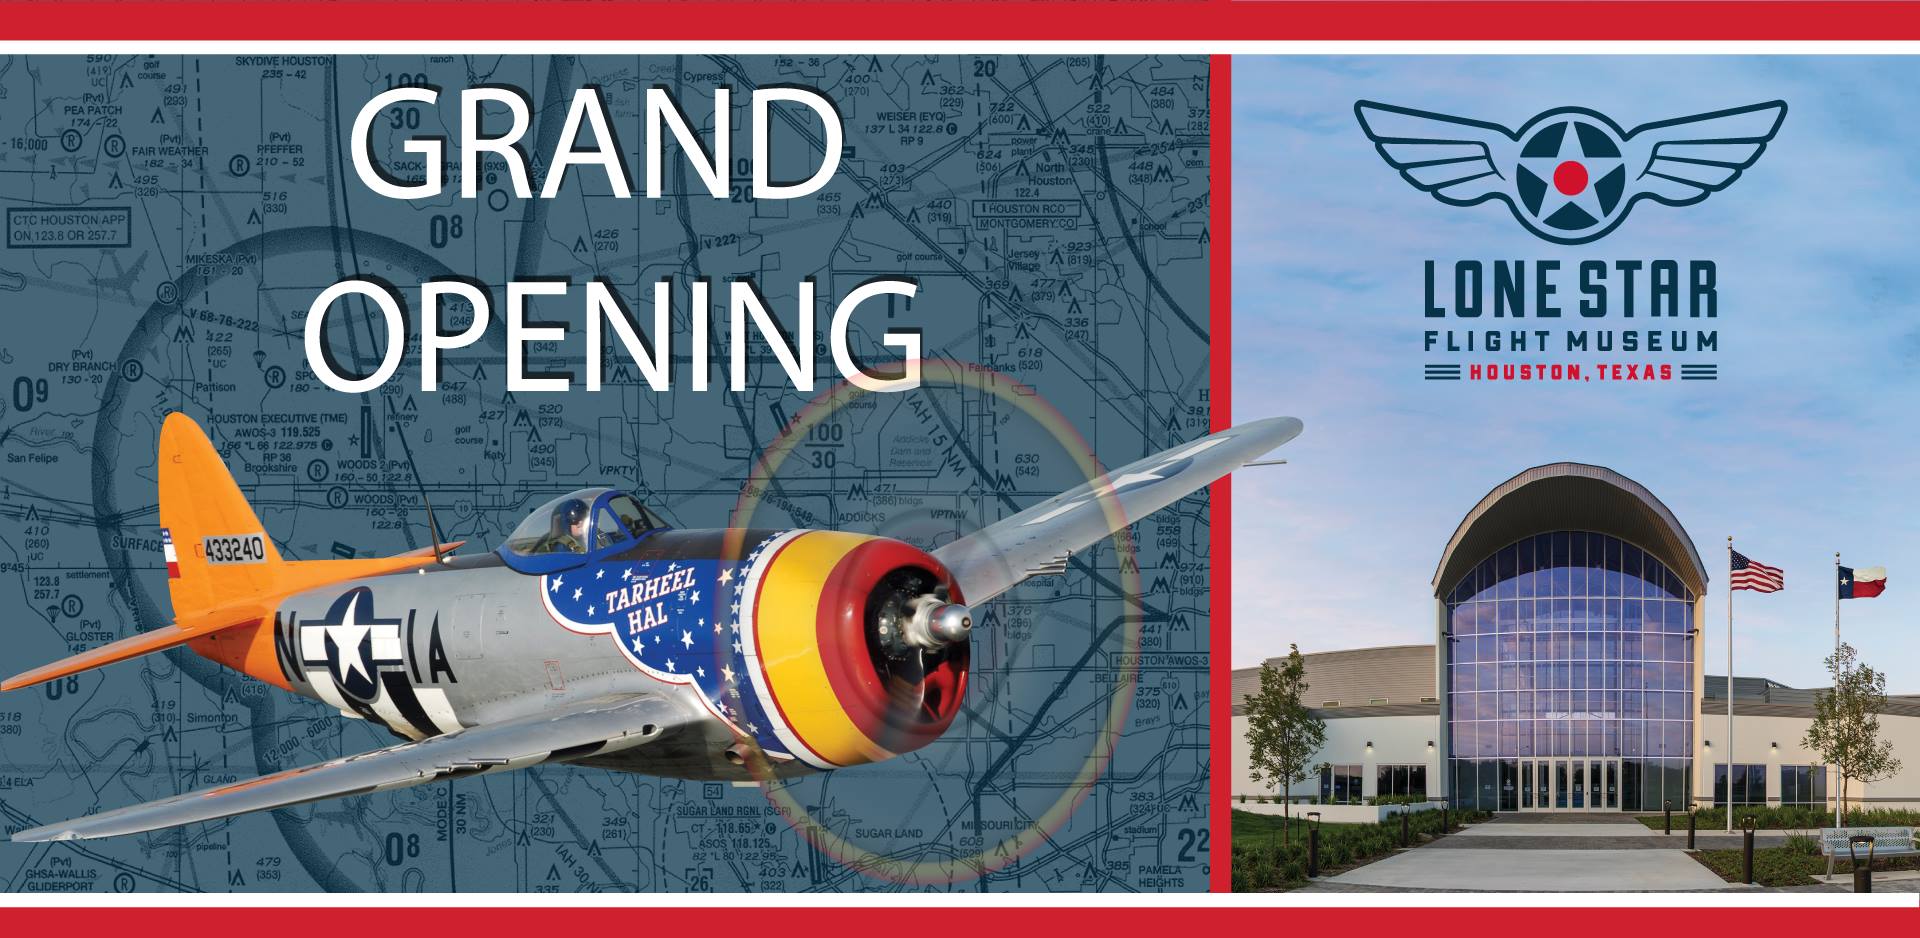 The grand opening of the Lone Star Flight Museum will take place on September 2nd! (photo via LSFM) 